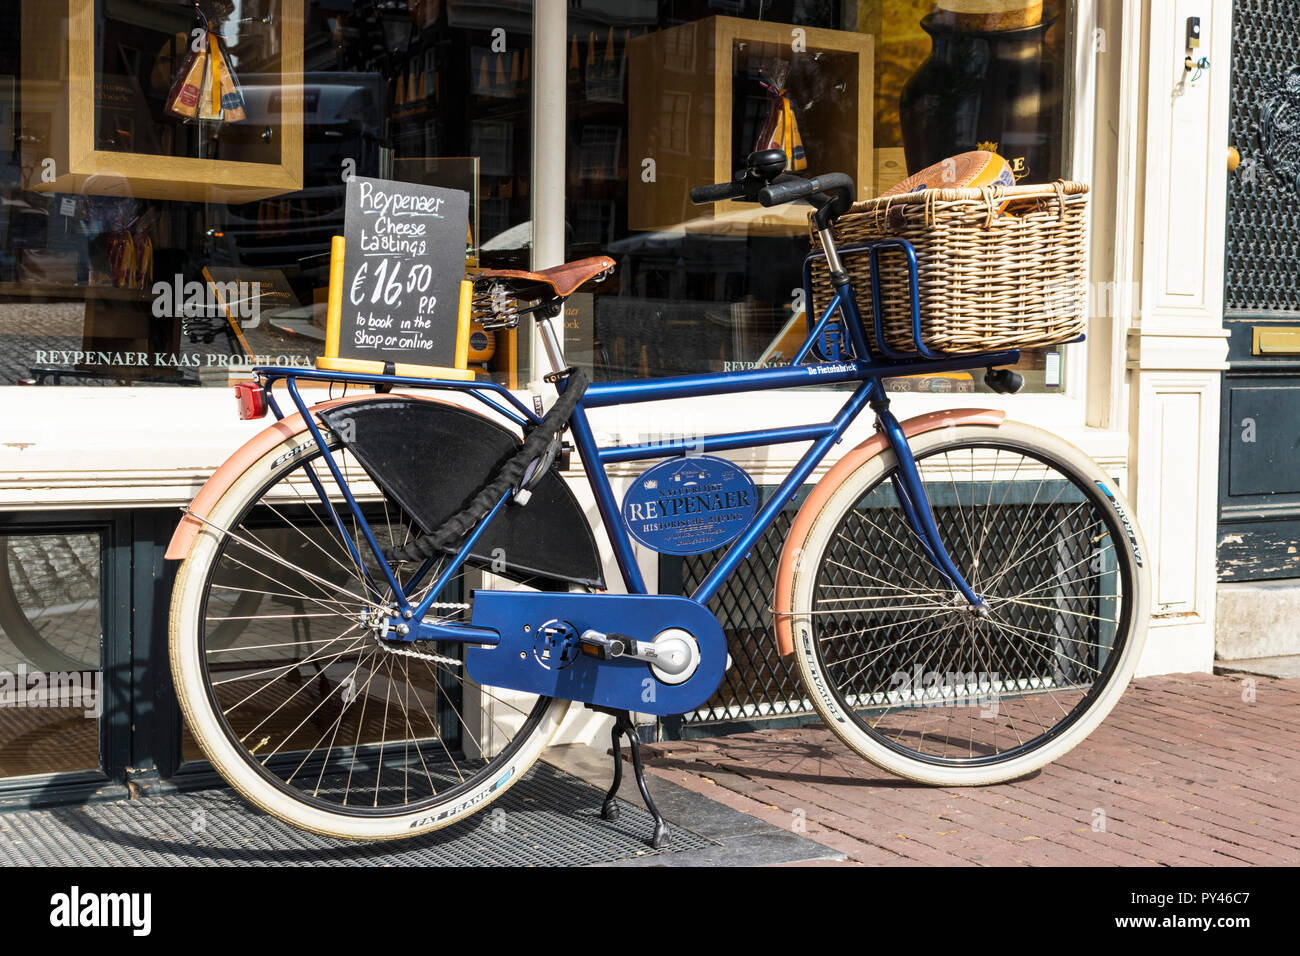 Amsterdam Reypenaer Tasting Room Singel Amsterdam Cheese tasting rooms Advertising bicycle propped up outside shop Holland The Netherlands EU Europe Stock Photo